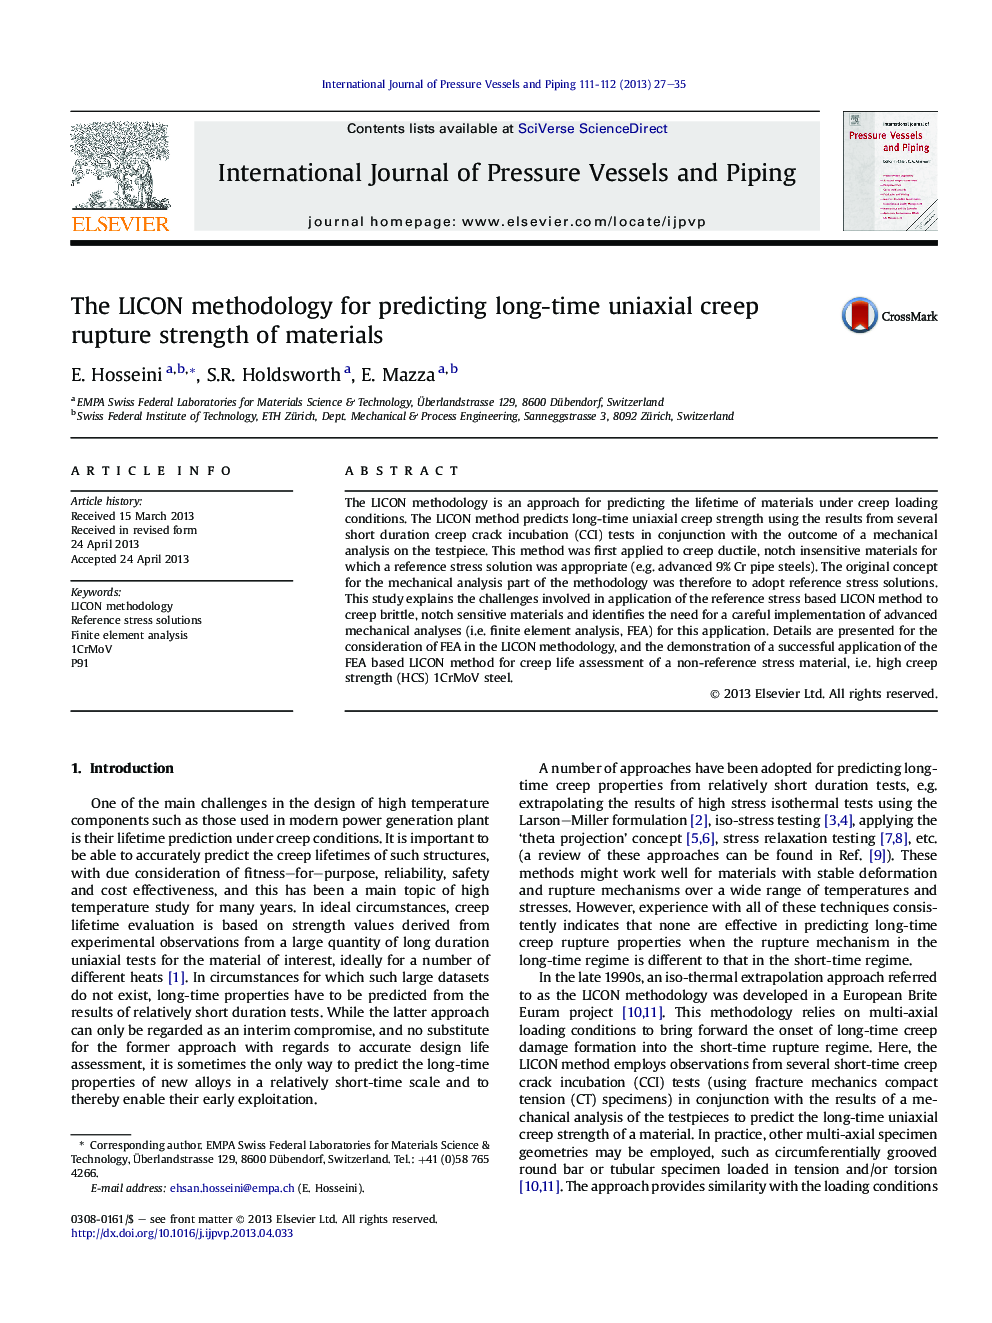 The LICON methodology for predicting long-time uniaxial creep rupture strength of materials